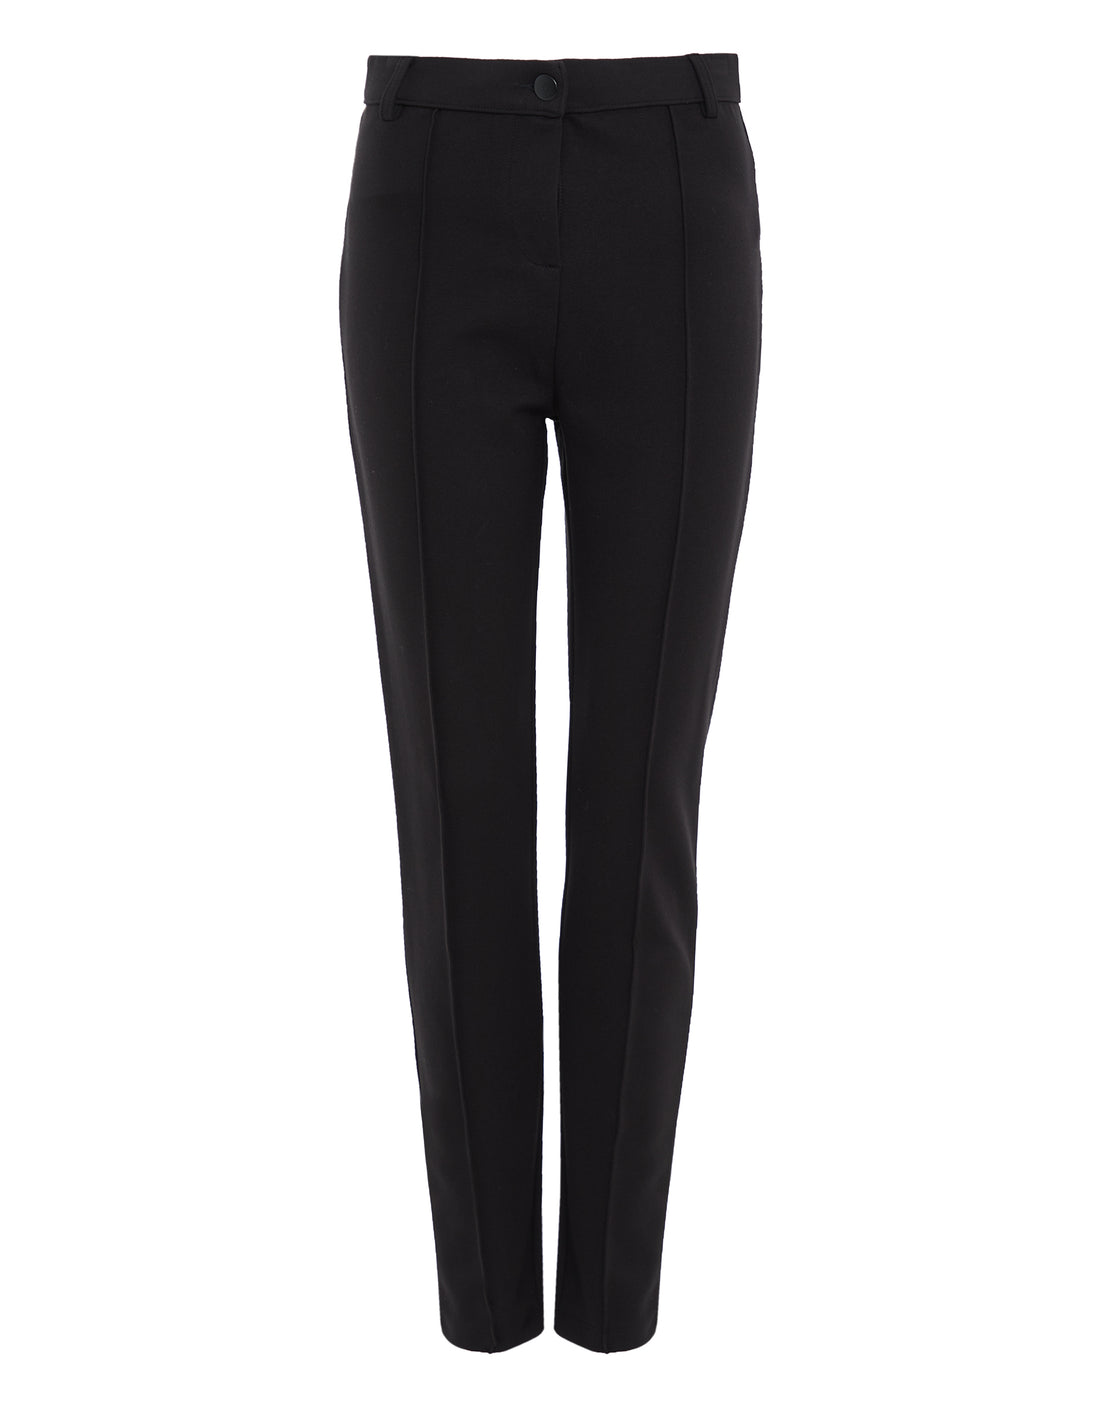 Buy Threadbare Black Slim Fit Ladies Military Button Stretch Ponte Trousers  from Next USA